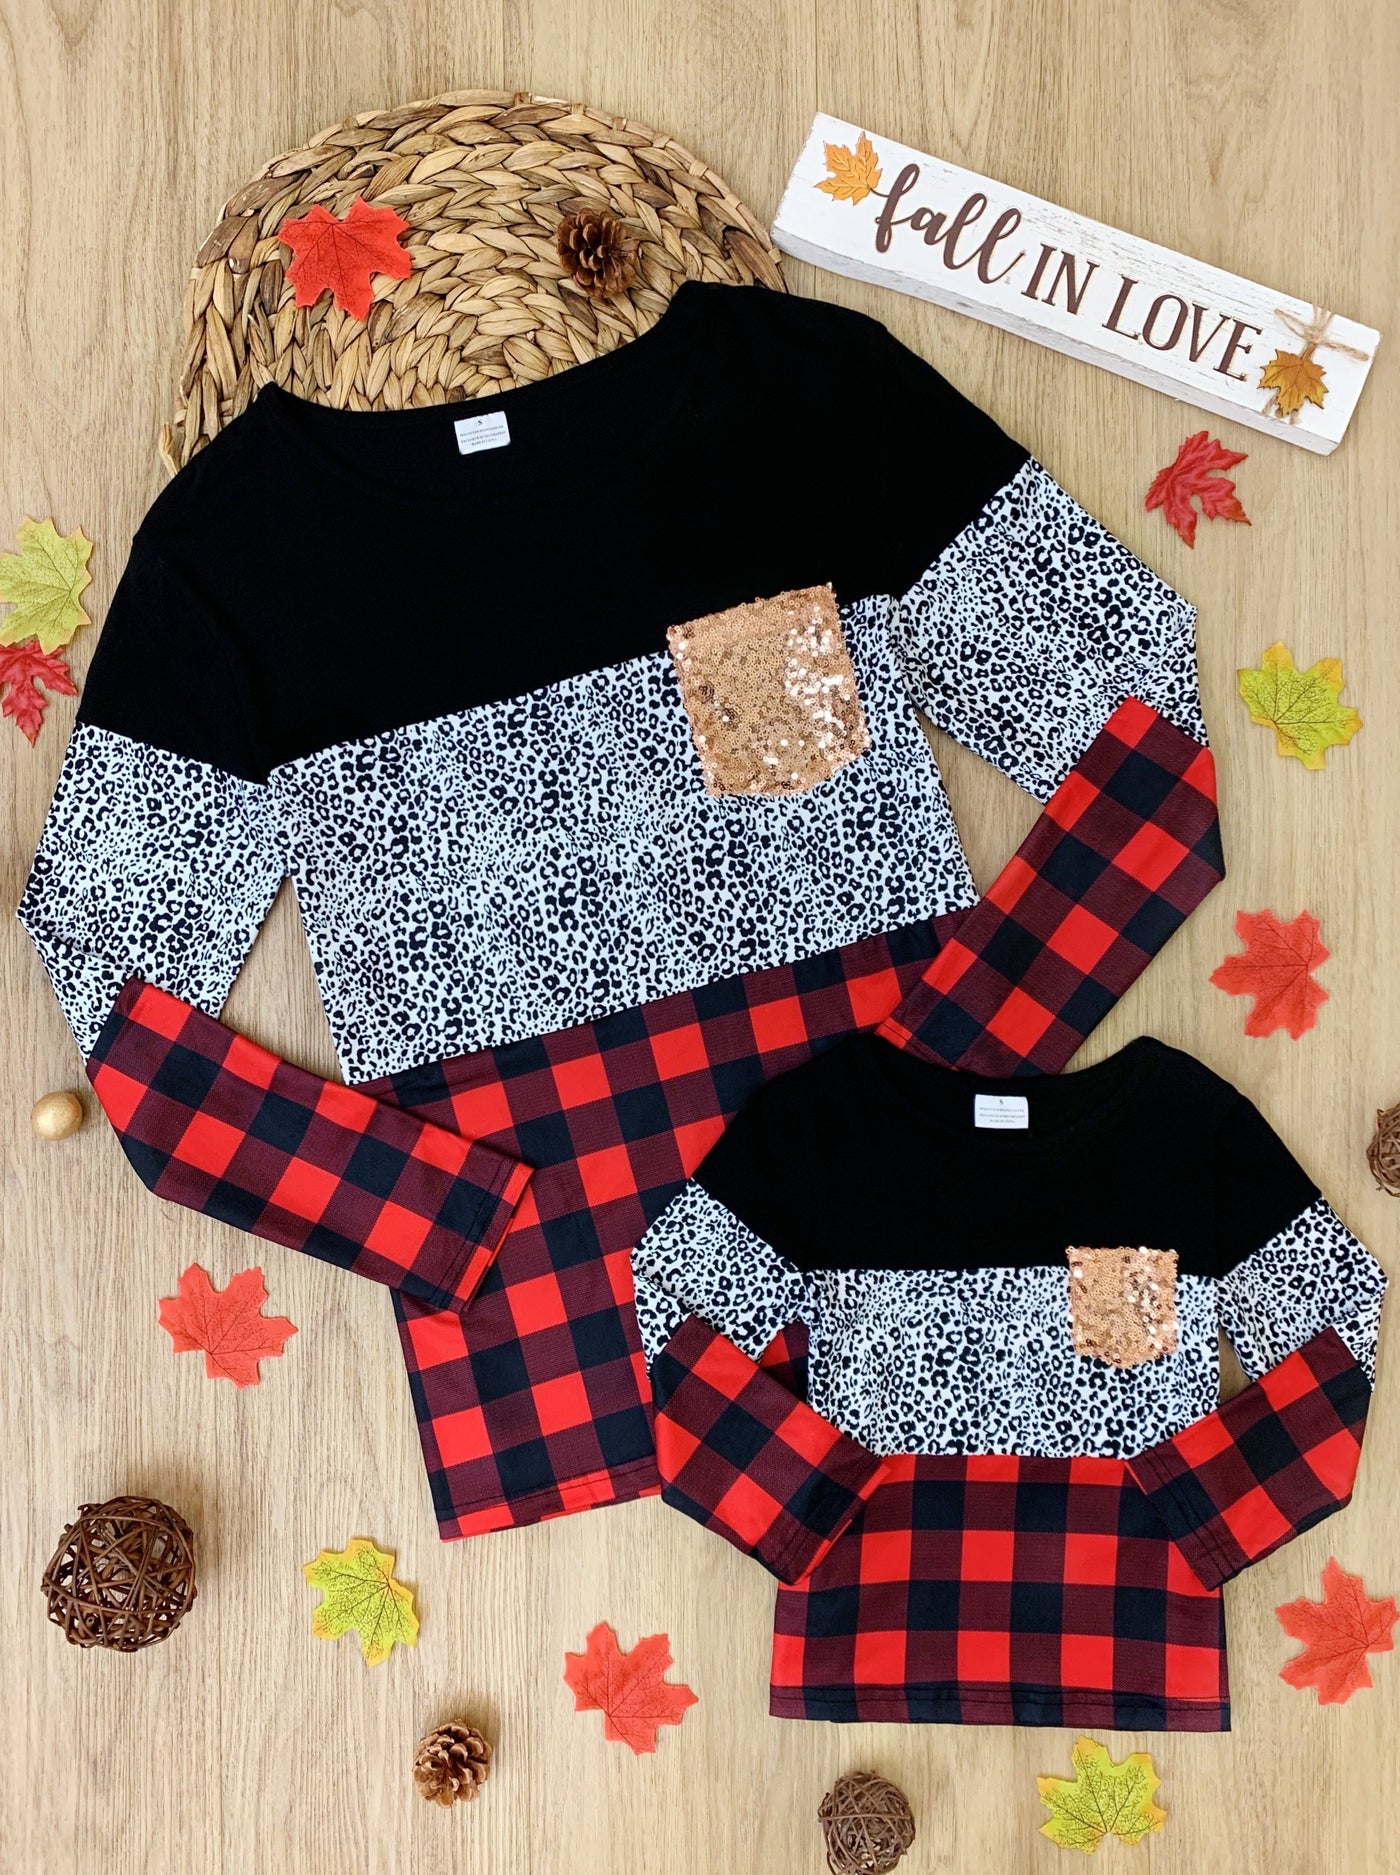 Mother-daughter matching Fall long-sleeve colorblock top with black, leopard print, and plaid print fabric and a gold sequin chest pocket - Mia Belle Girls